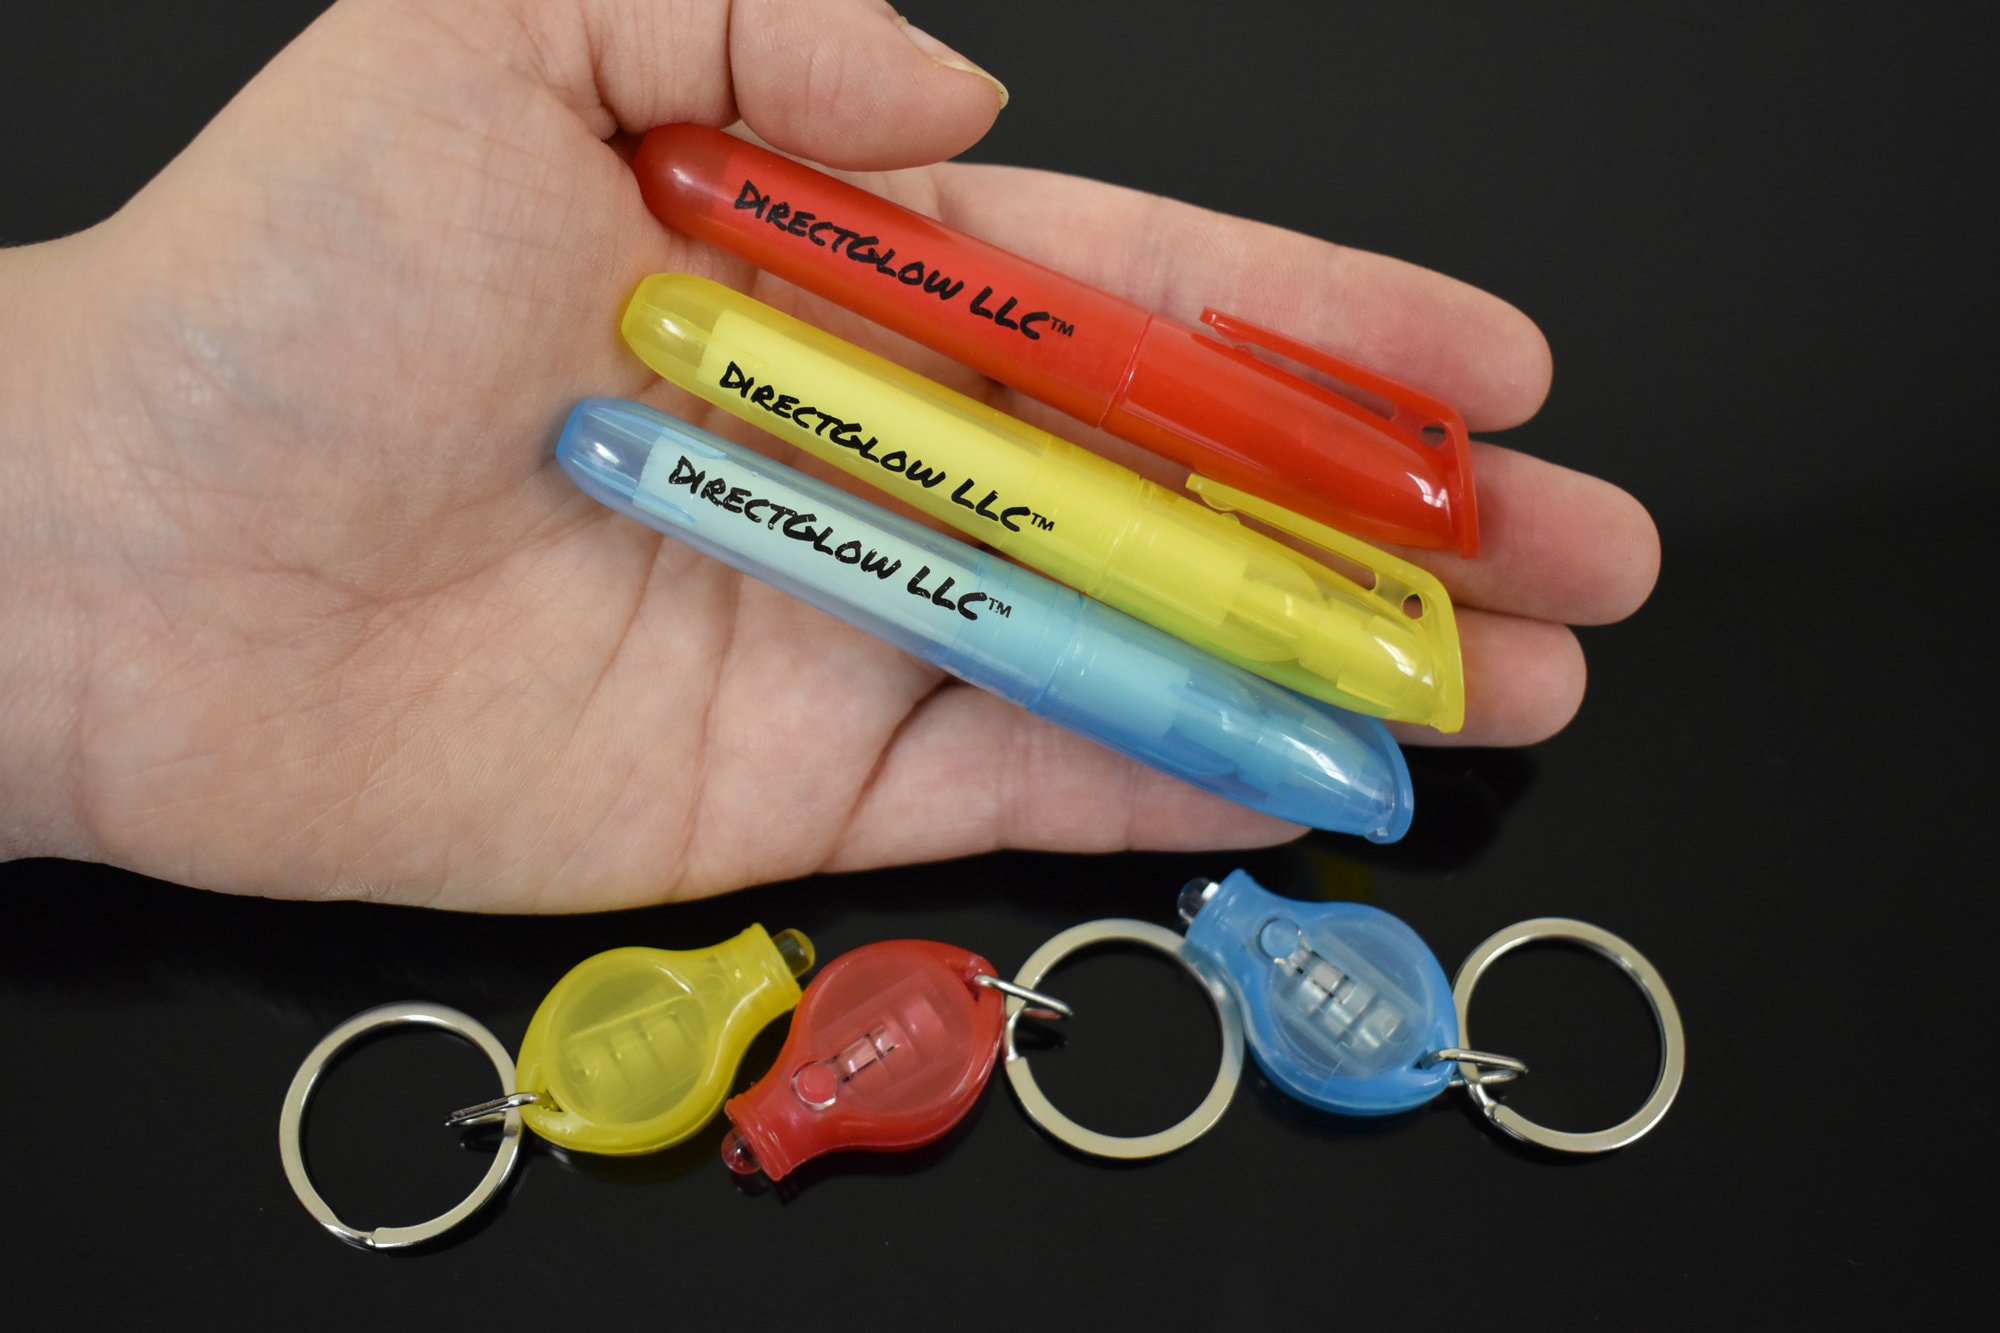 DirectGlow Invisible UV Ink Marker Pen with Ultraviolet LED Keychain  Blacklight